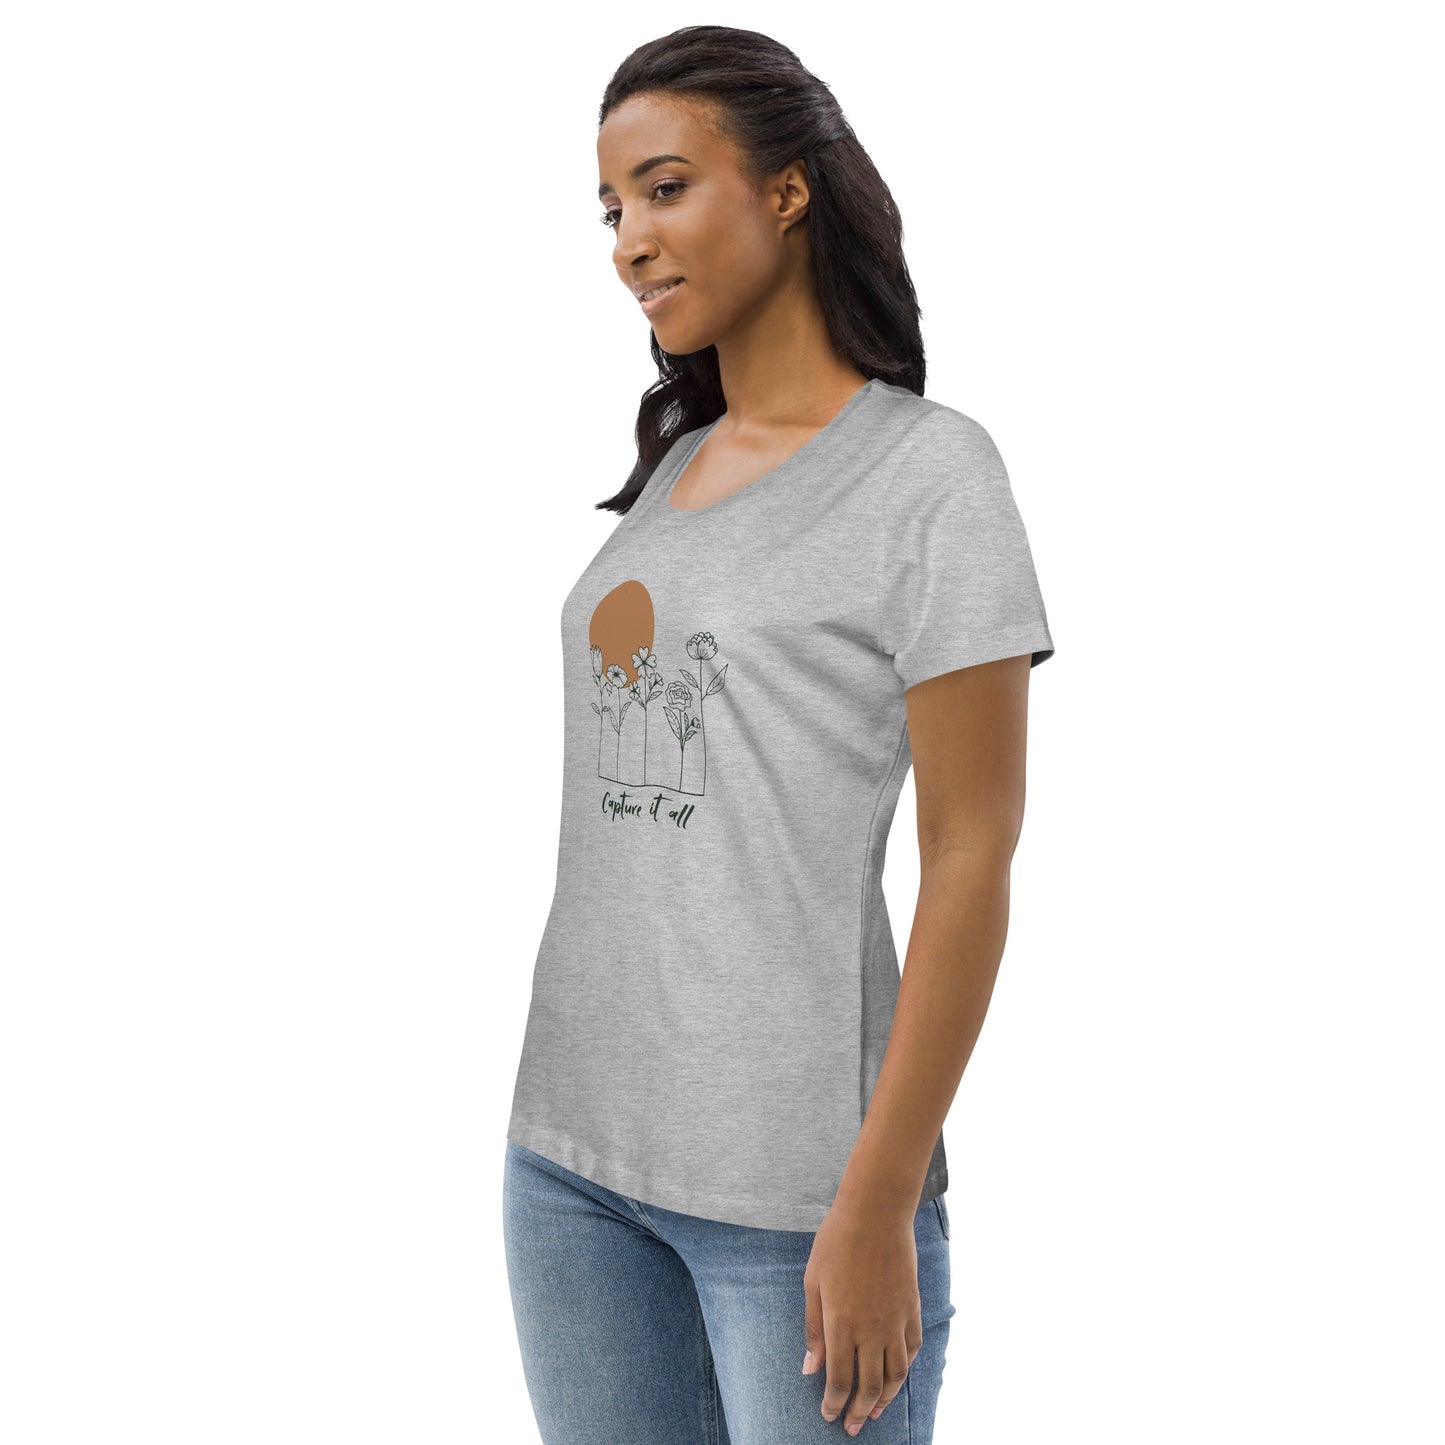 Capture it all - Women's fitted eco tee - HobbyMeFree